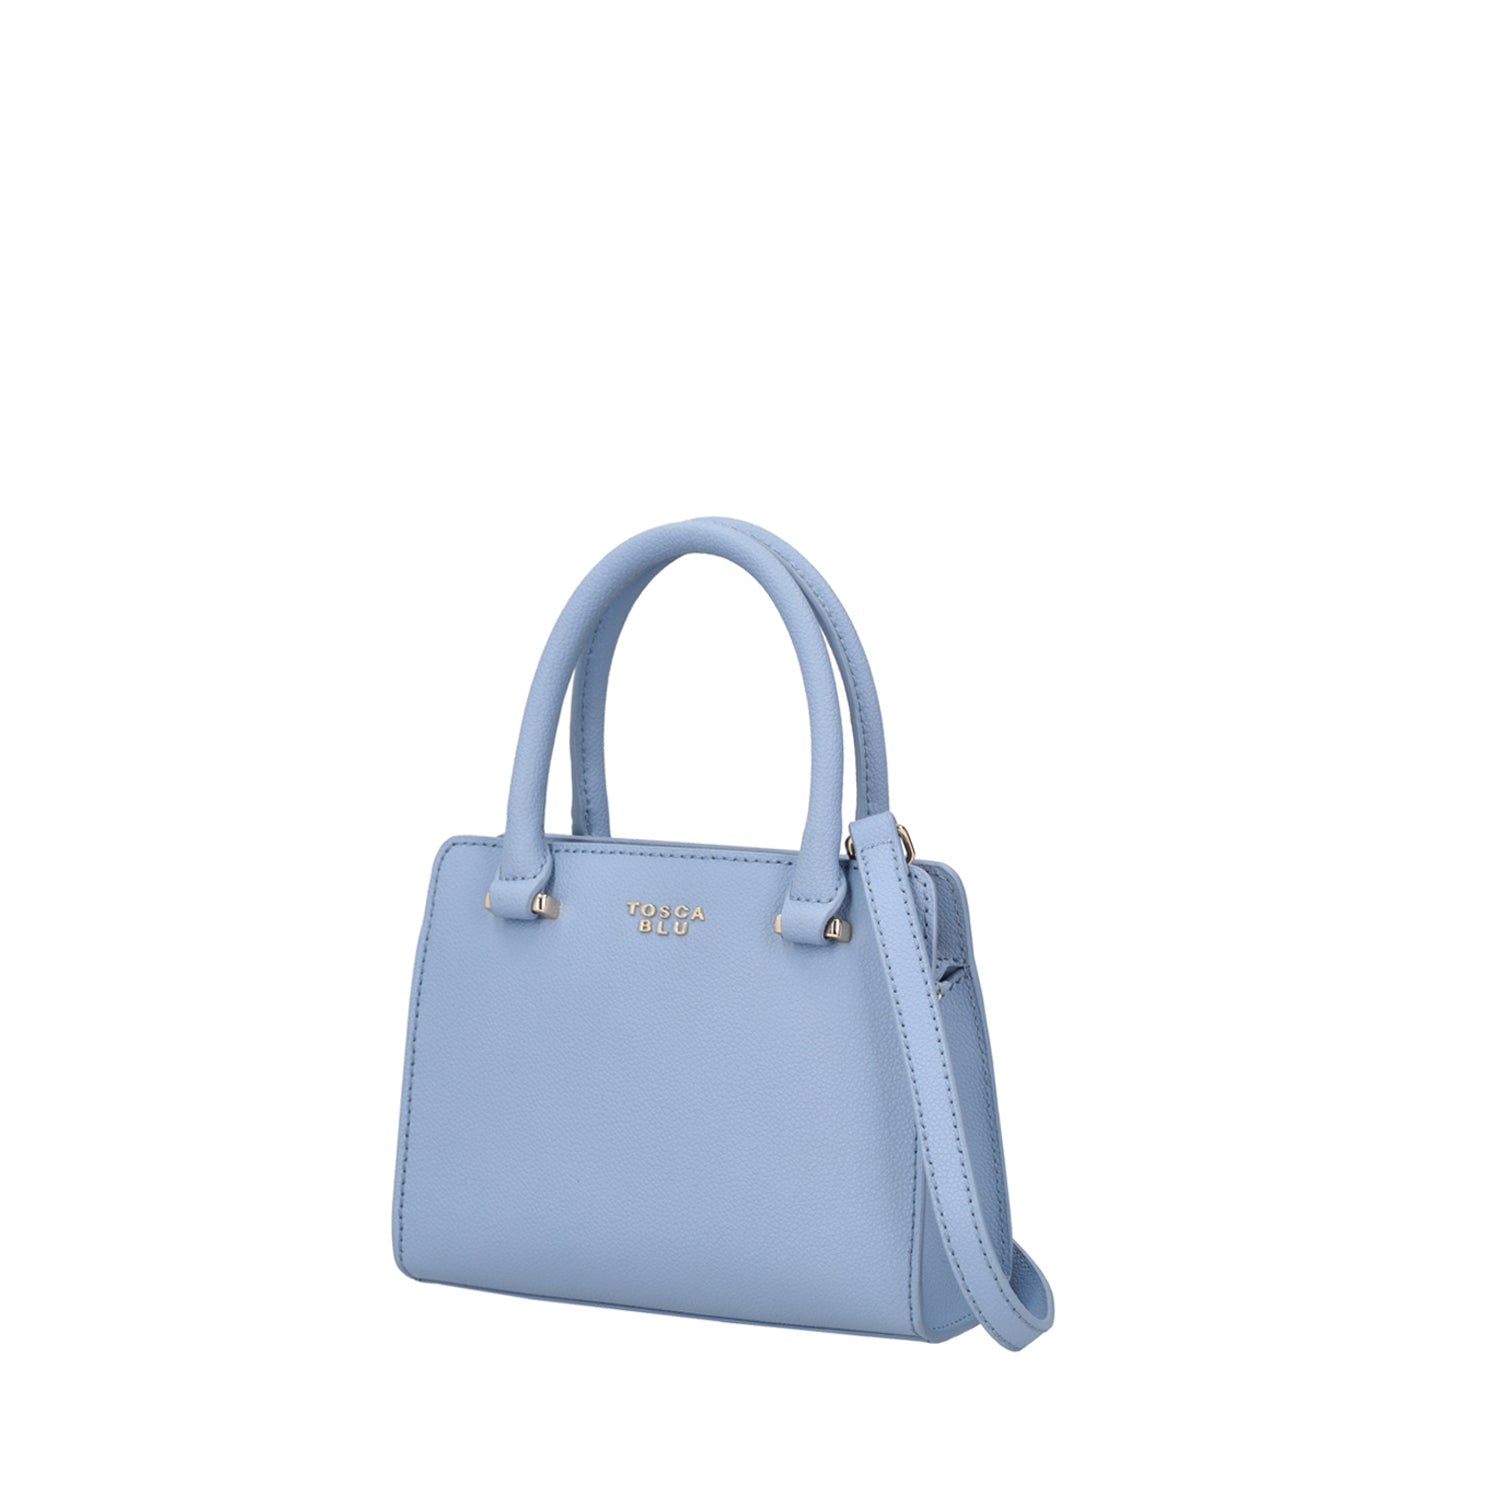 Light blue bag on a white Royalty Free Vector Image